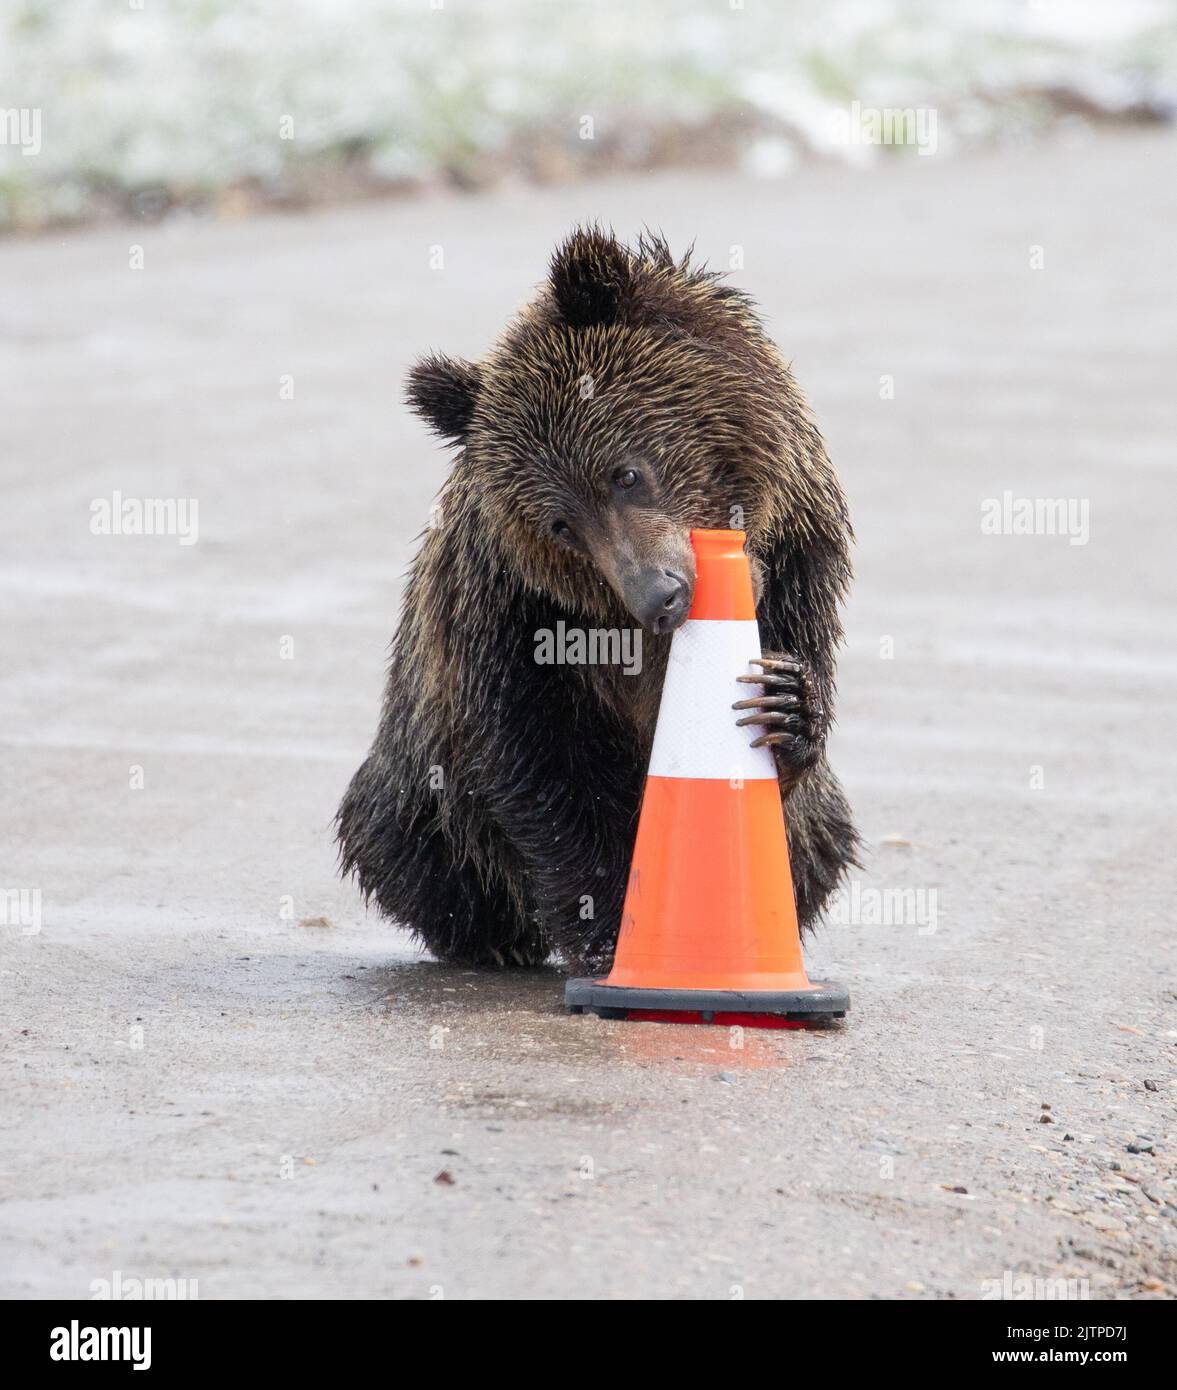 The cub chewing the cone. Wyoming, USA: LIKE A UK prankster student these comical images show a furry bear thief stealing road cones and causing chaos Stock Photo